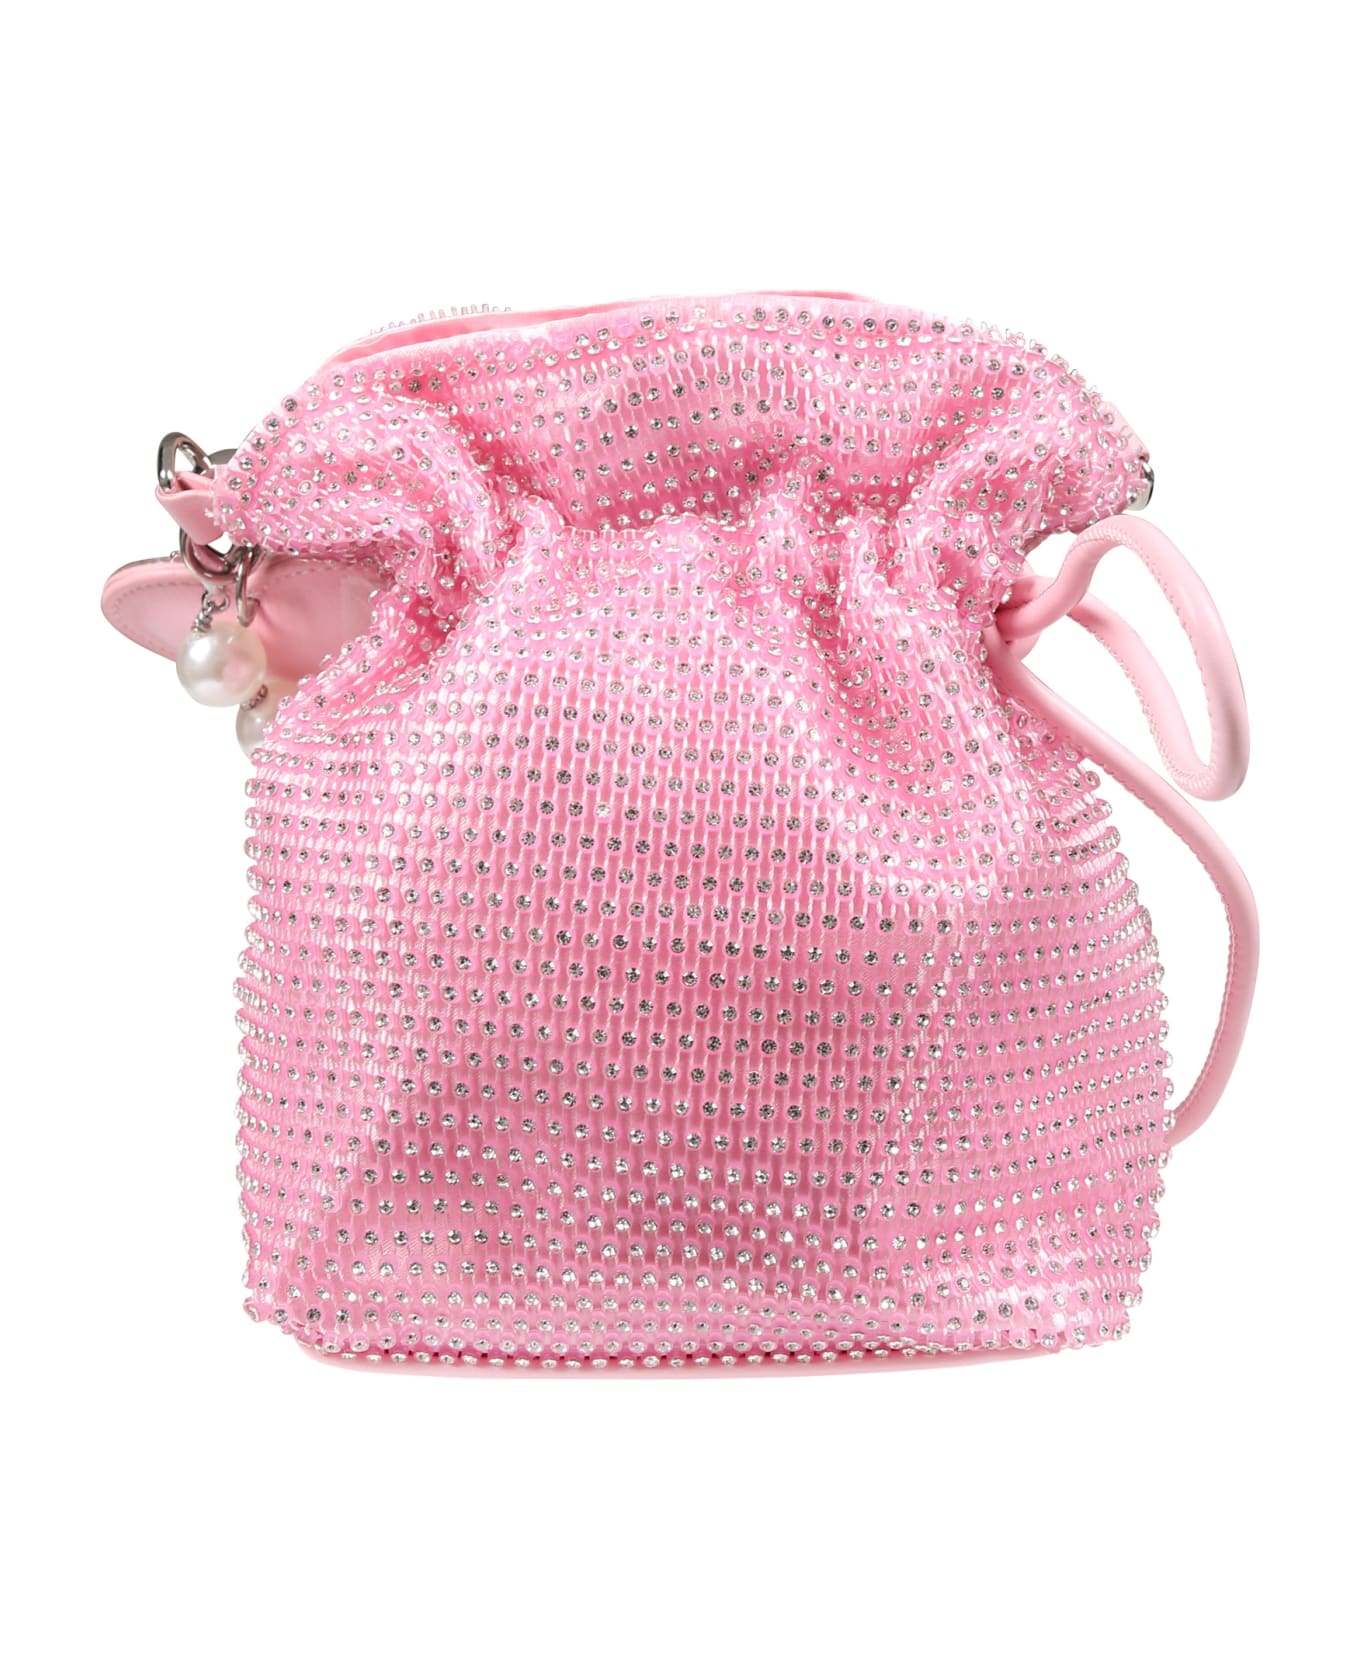 Monnalisa Pink Bag For Girl With All-over Rhinestones - Pink